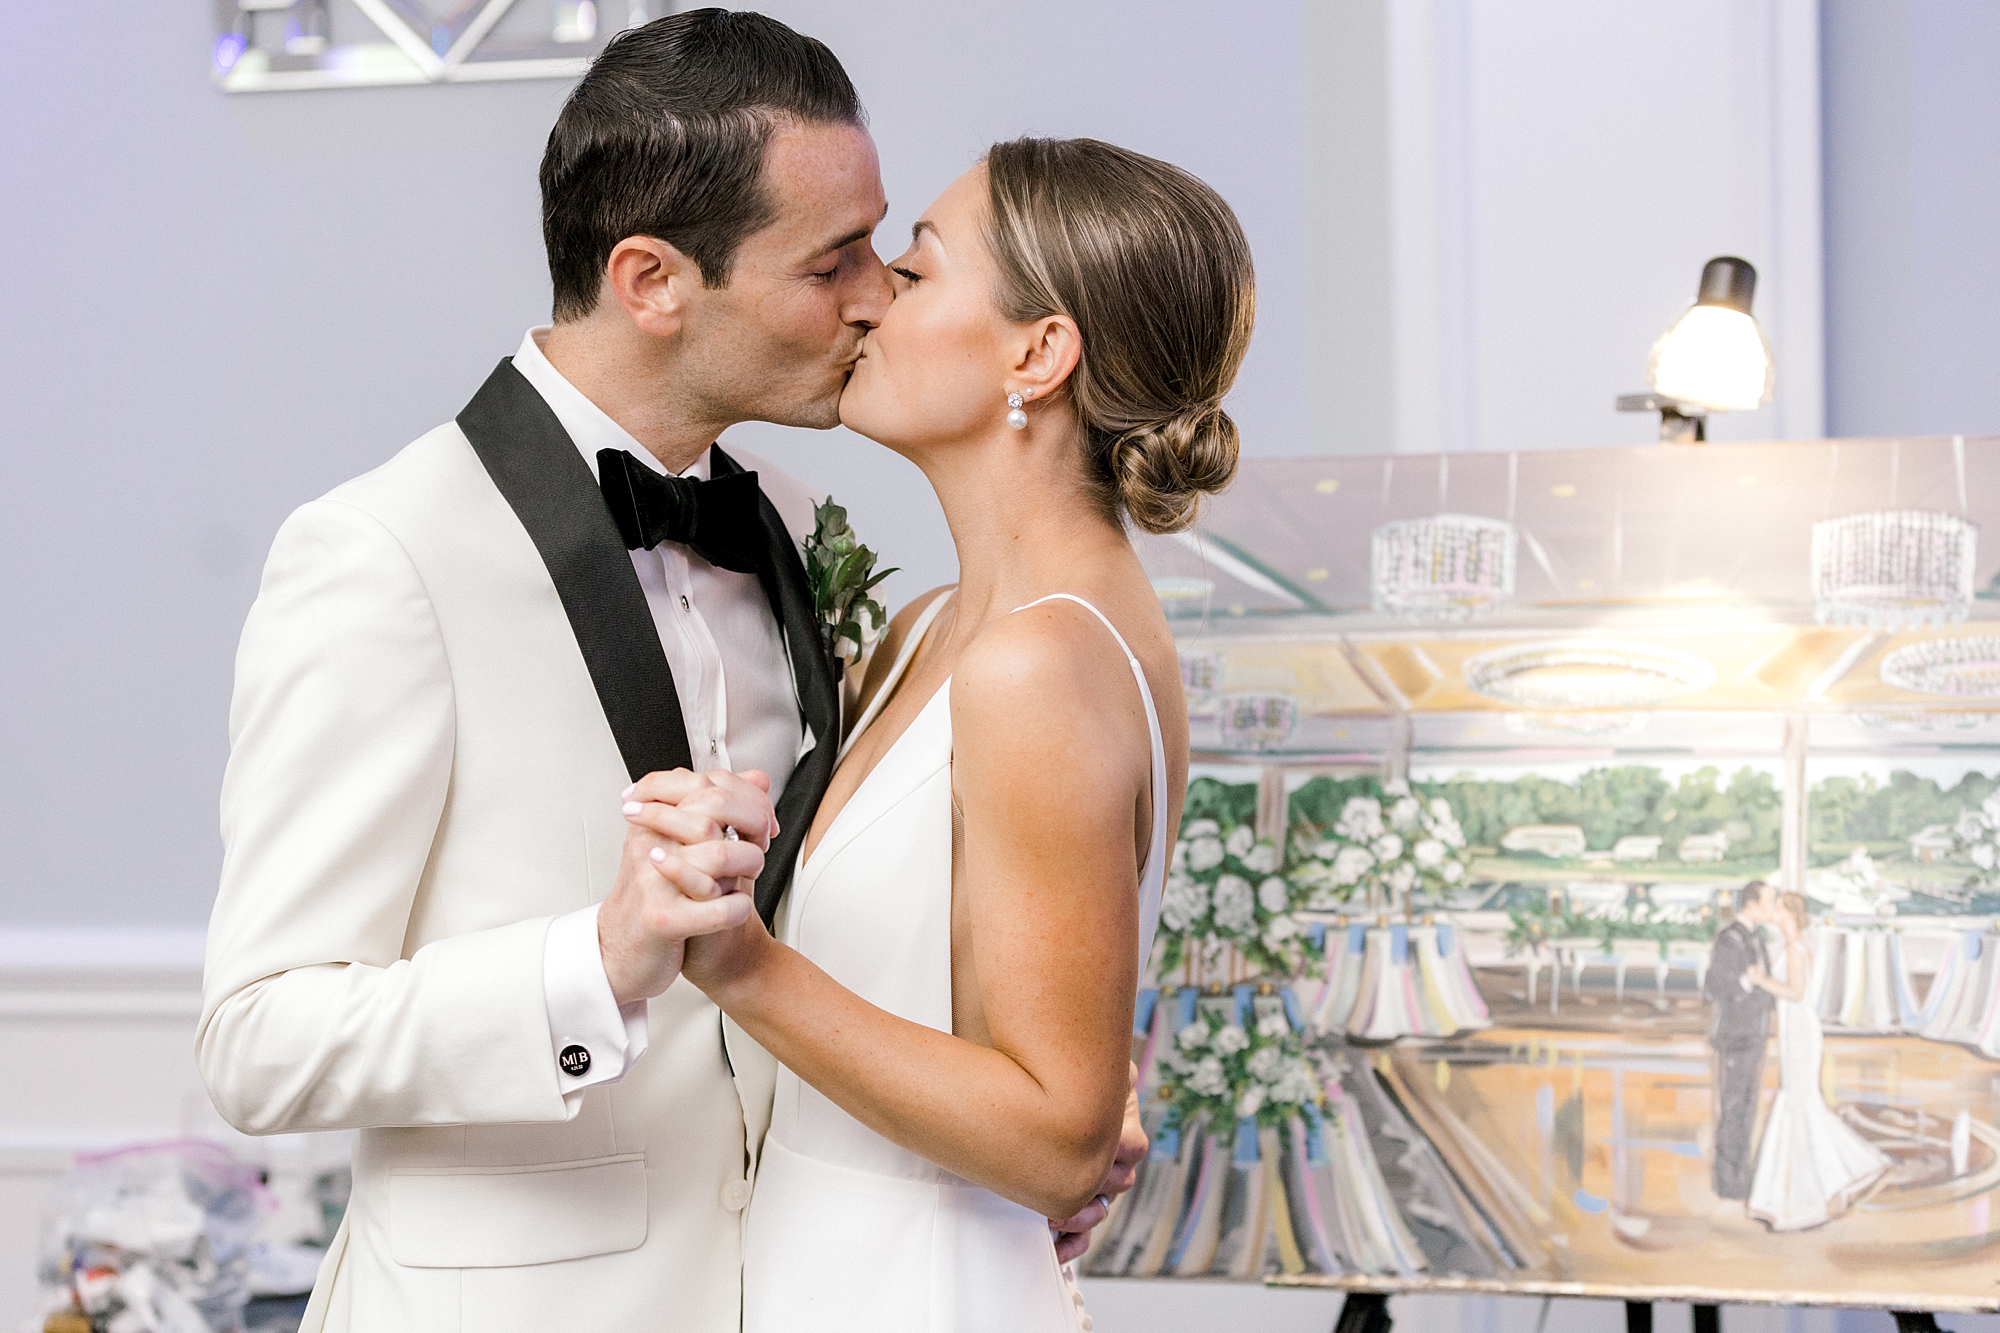 newlyweds kiss during wedding reception by painting